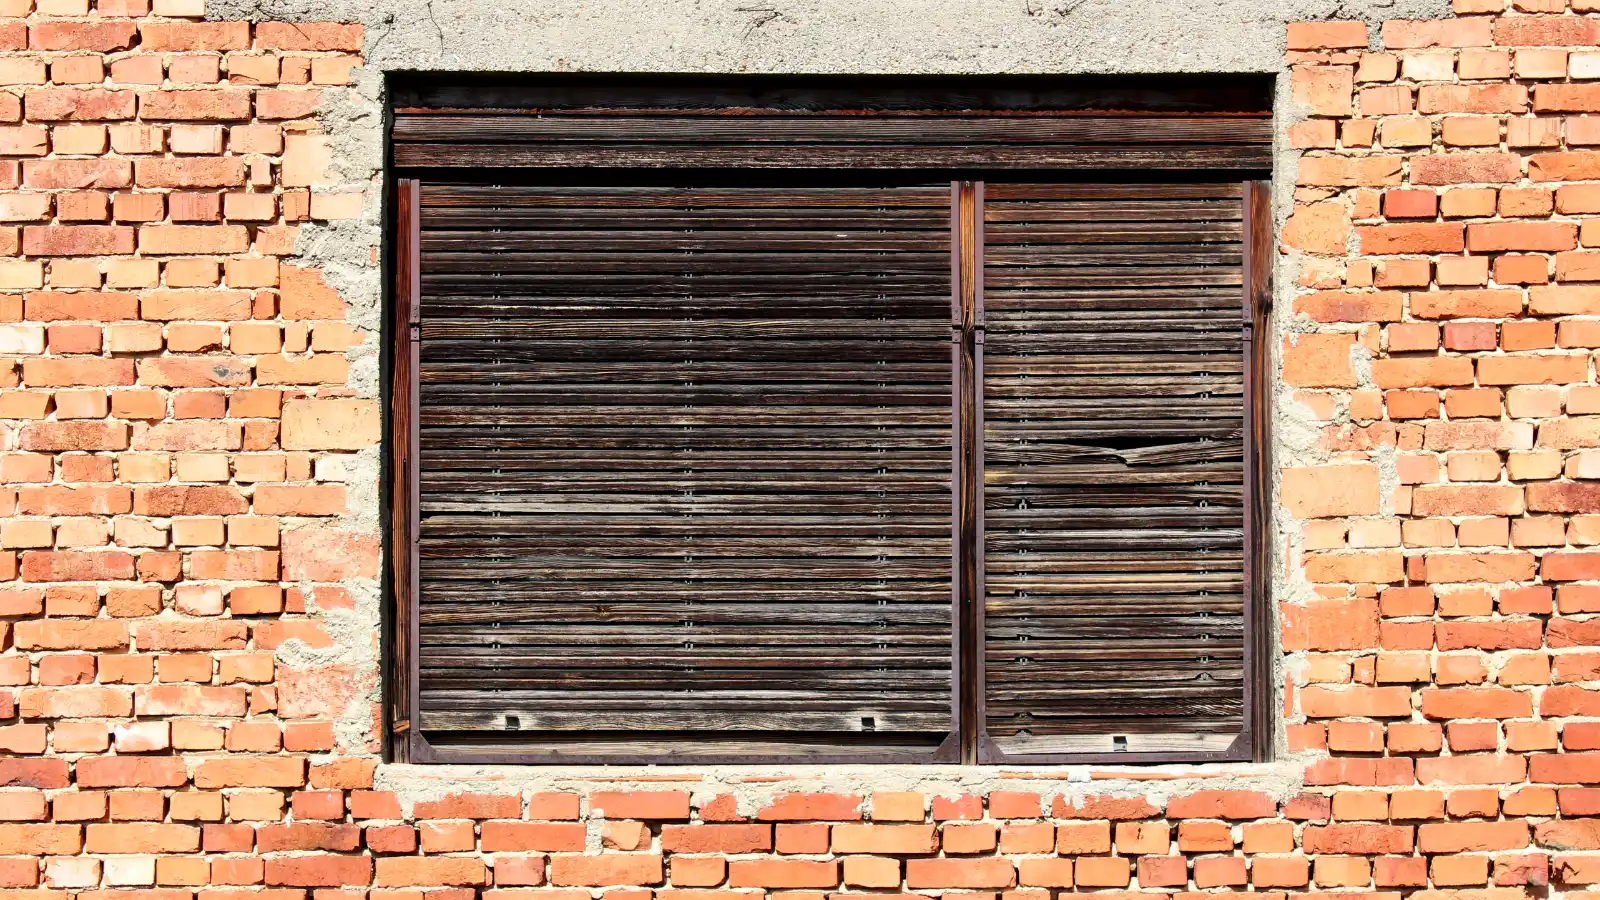 An old window with wooden shutters on a brick wall.